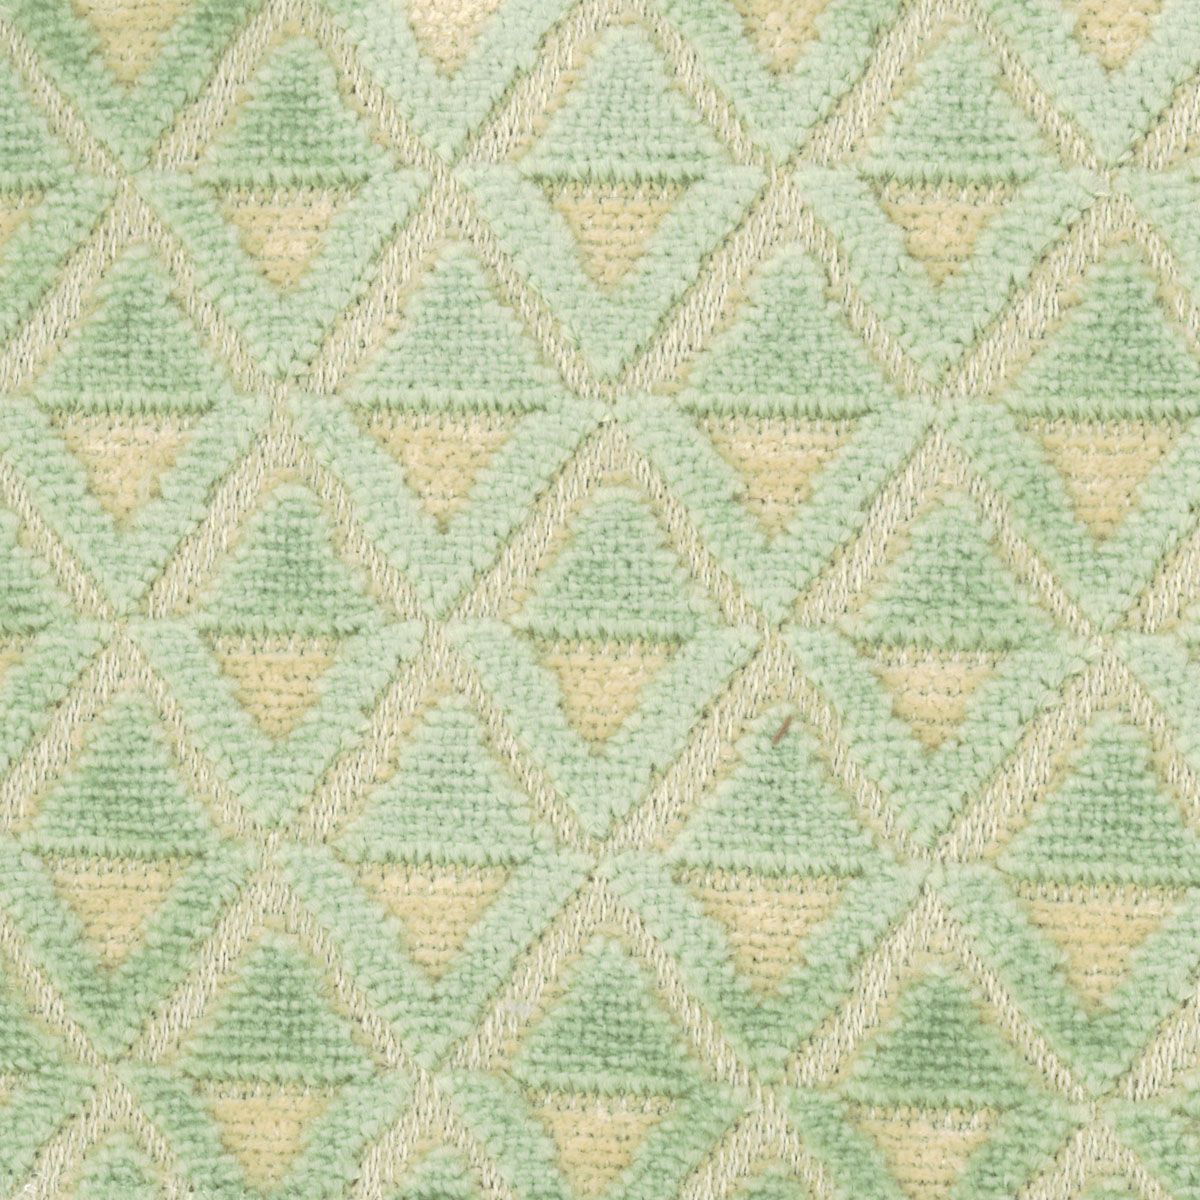 Sensi fabric in mint color - pattern number VV 00336249 - by Scalamandre in the Old World Weavers collection